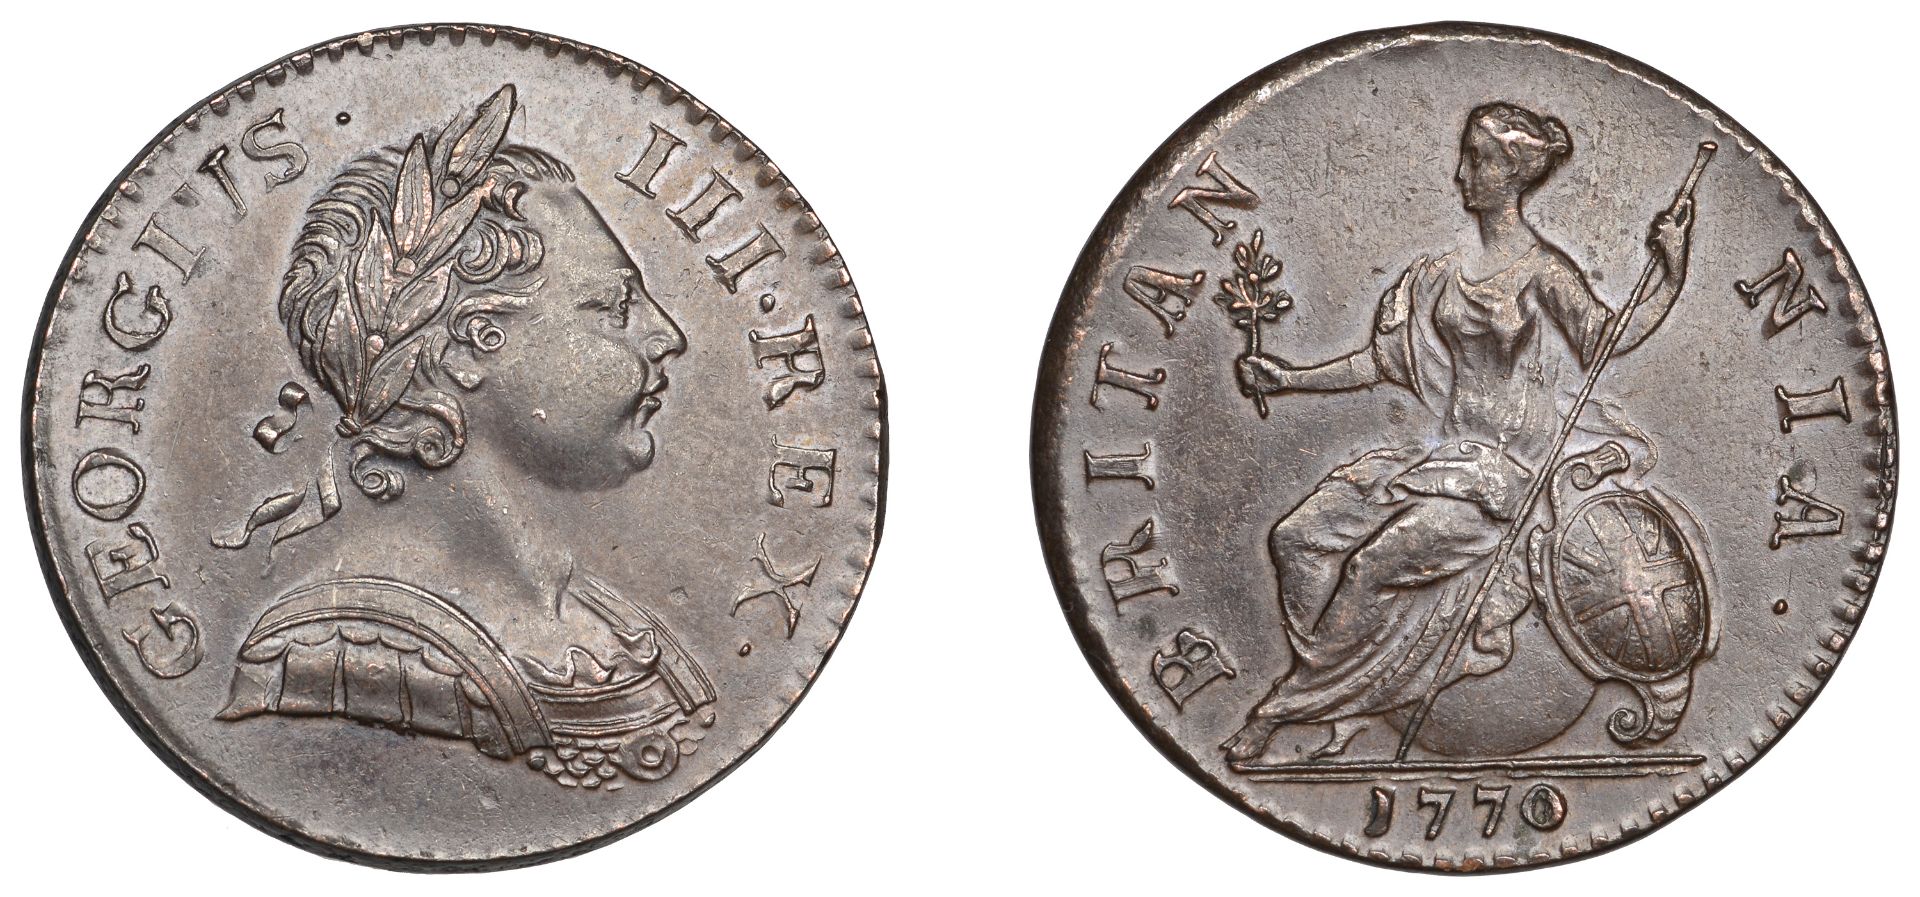 George III (1760-1820), Pre-1816 issues, Halfpenny, 1770 (BMC 893; S 3774). About extremely...